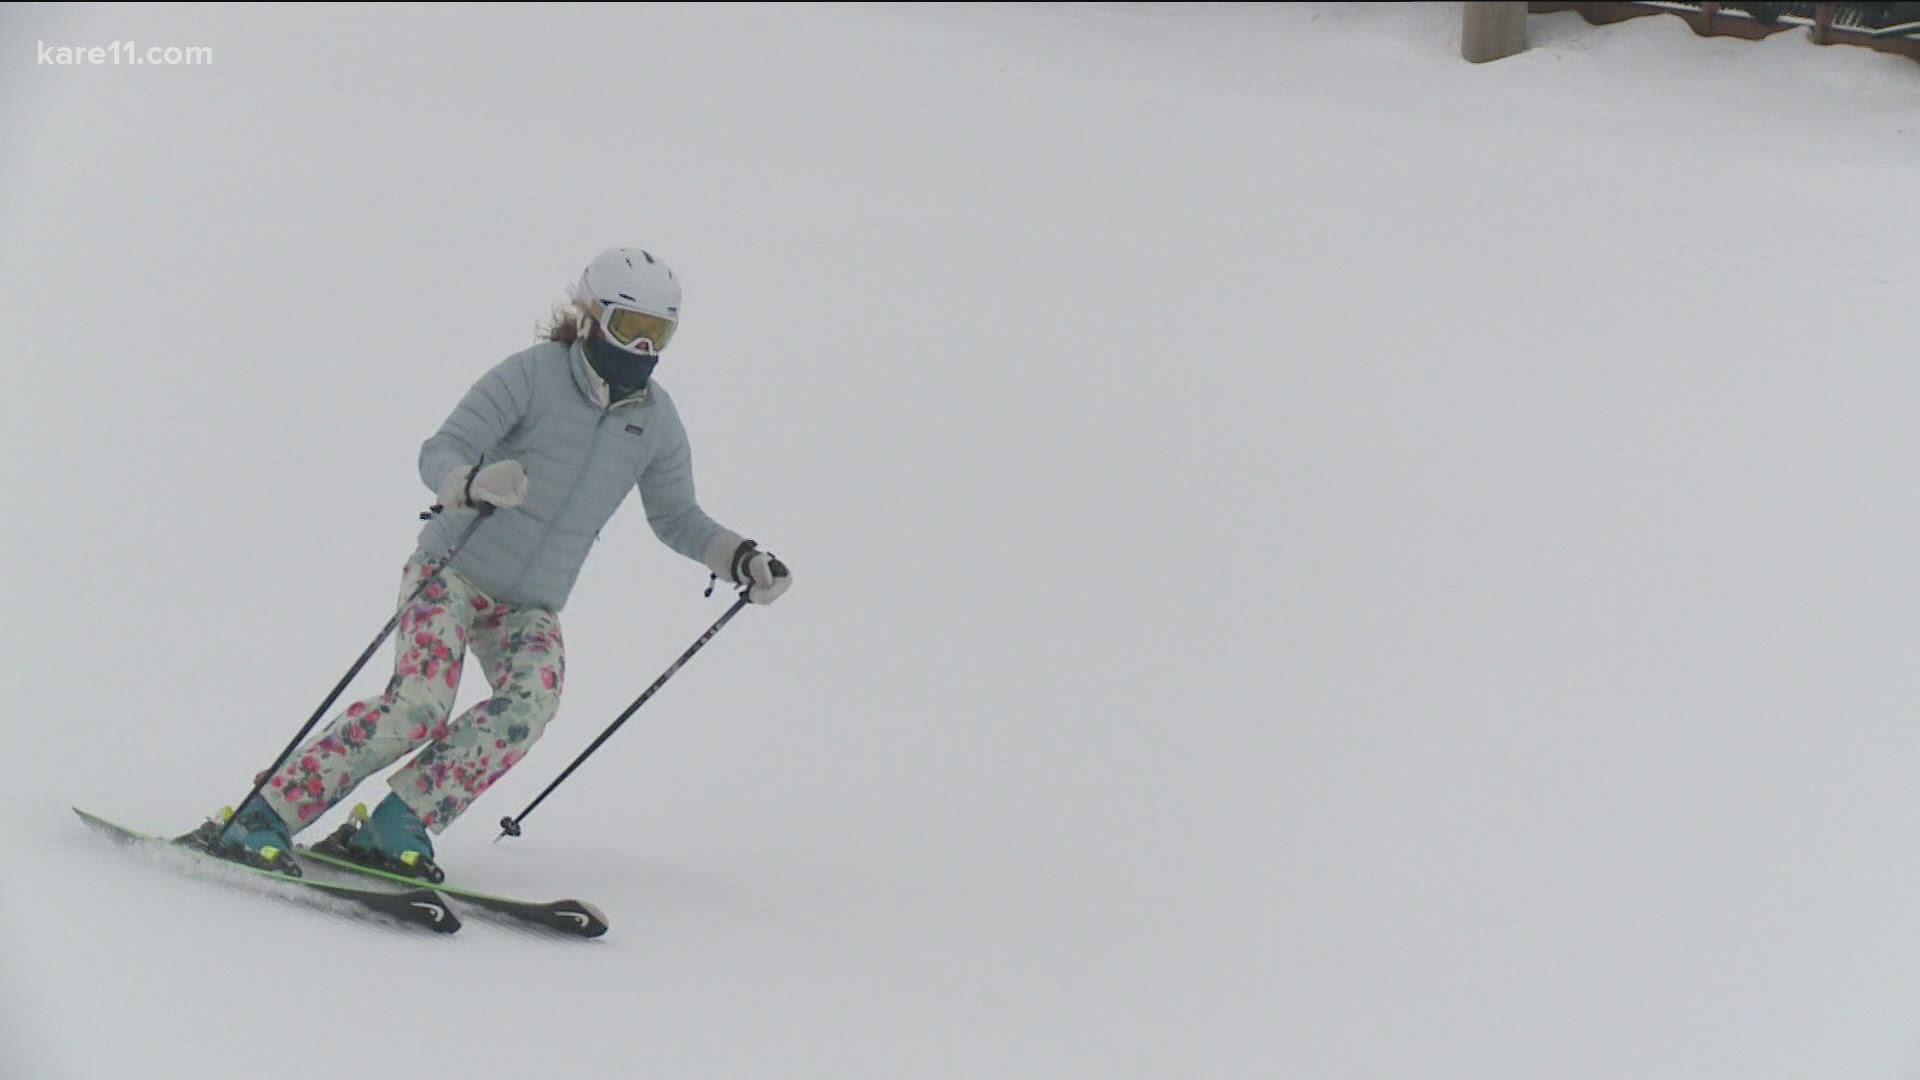 There are over 400 slopes or runs in Minnesota and Kelly Bent is trying to ski them all